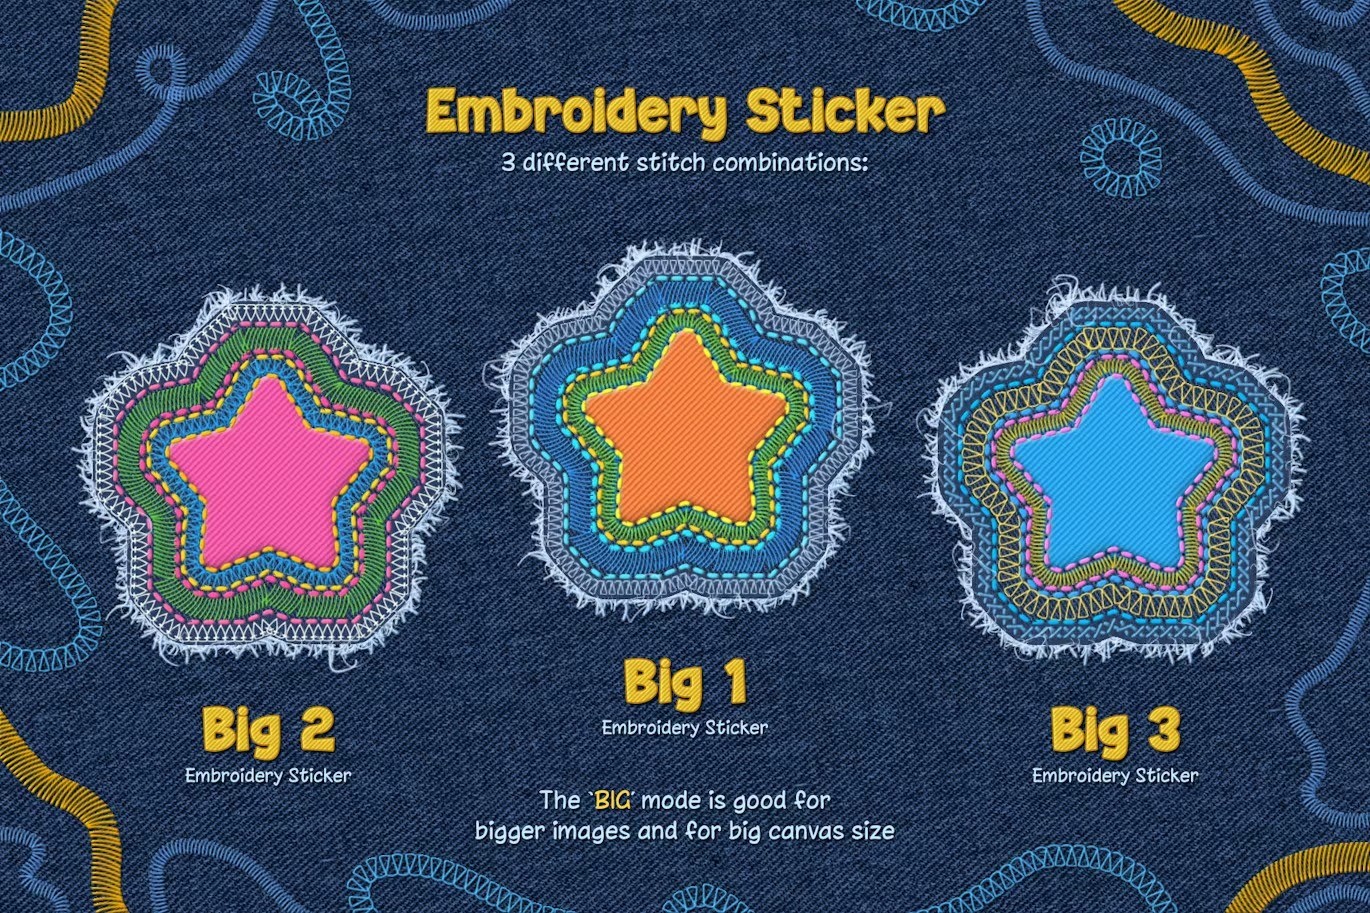 Embroidery Sticker Photoshop Action-5.jpg